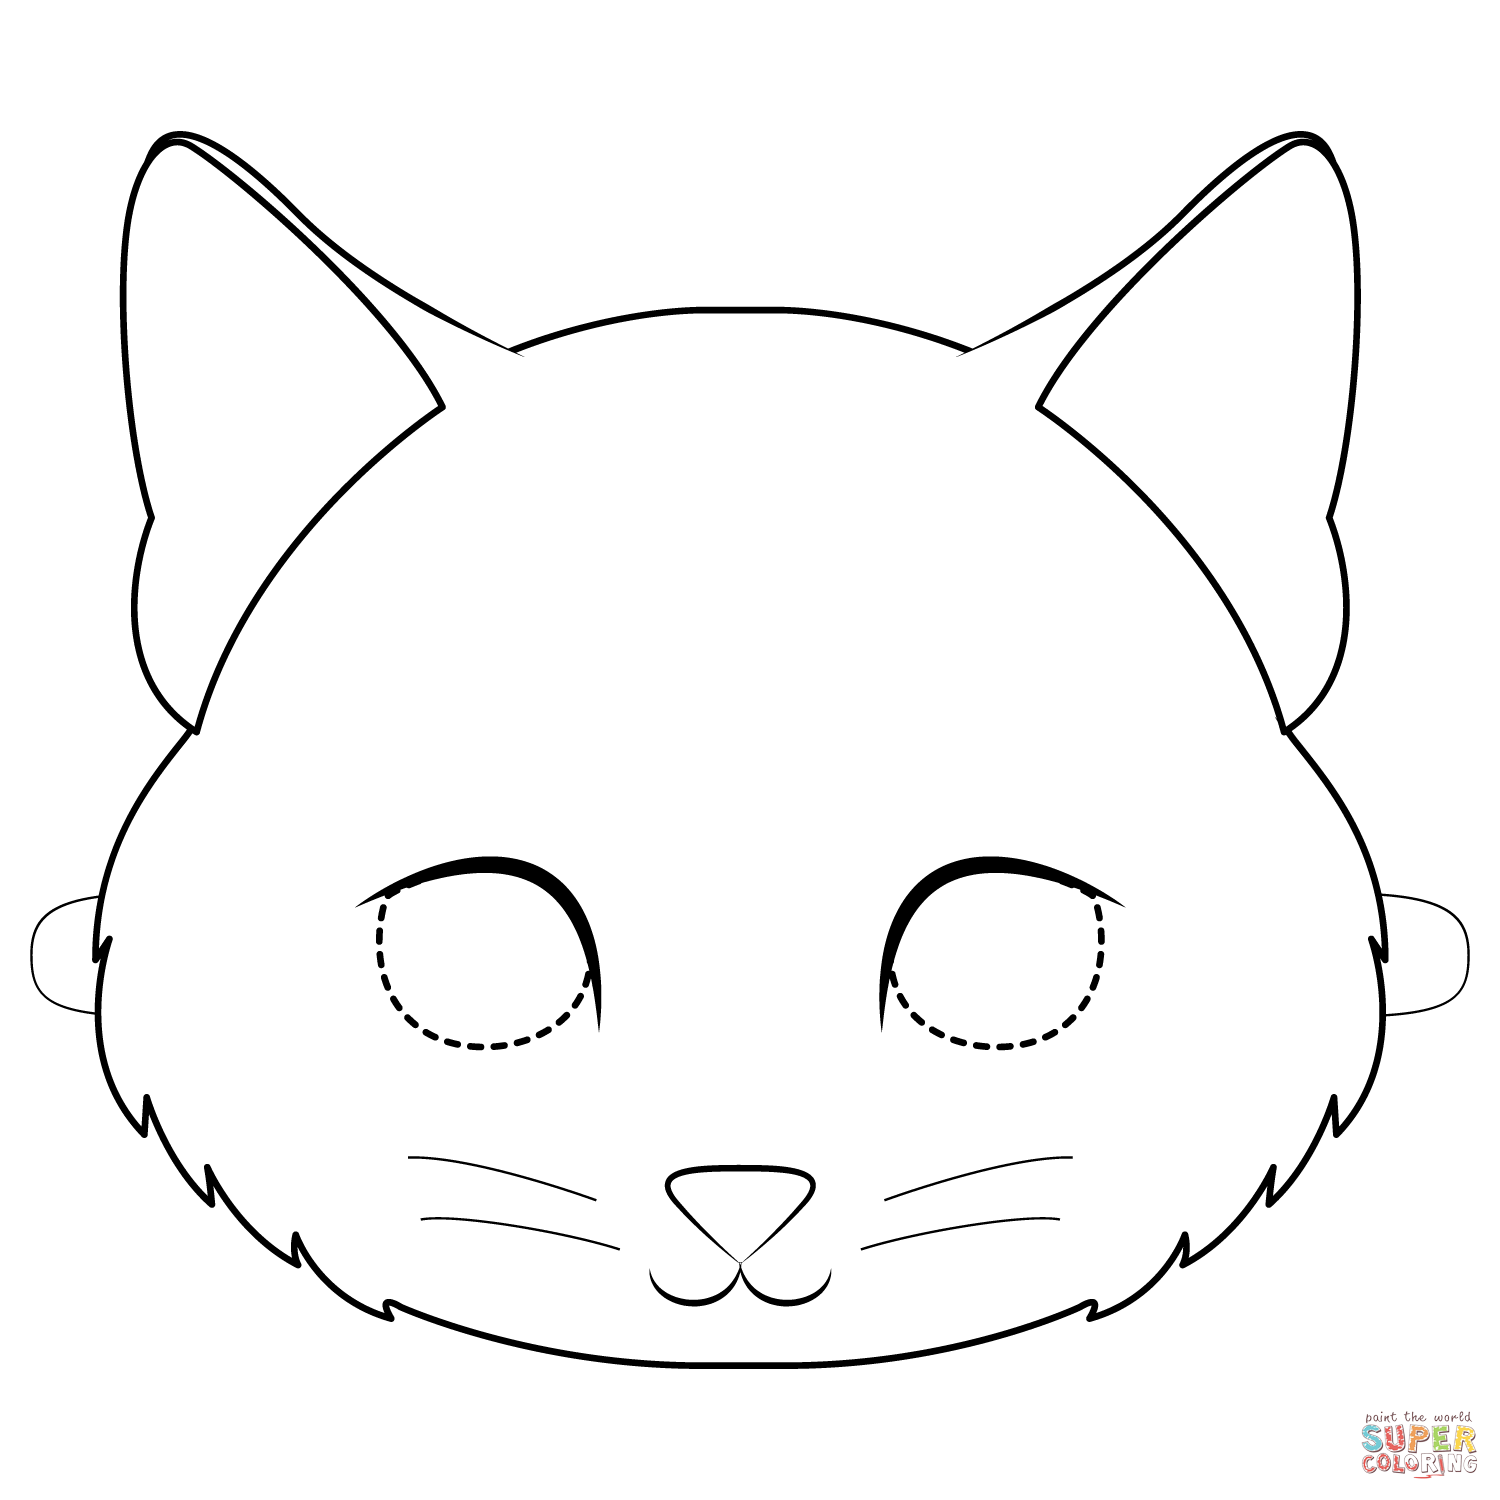 Kitten Mask coloring page | Free Printable Coloring Pages